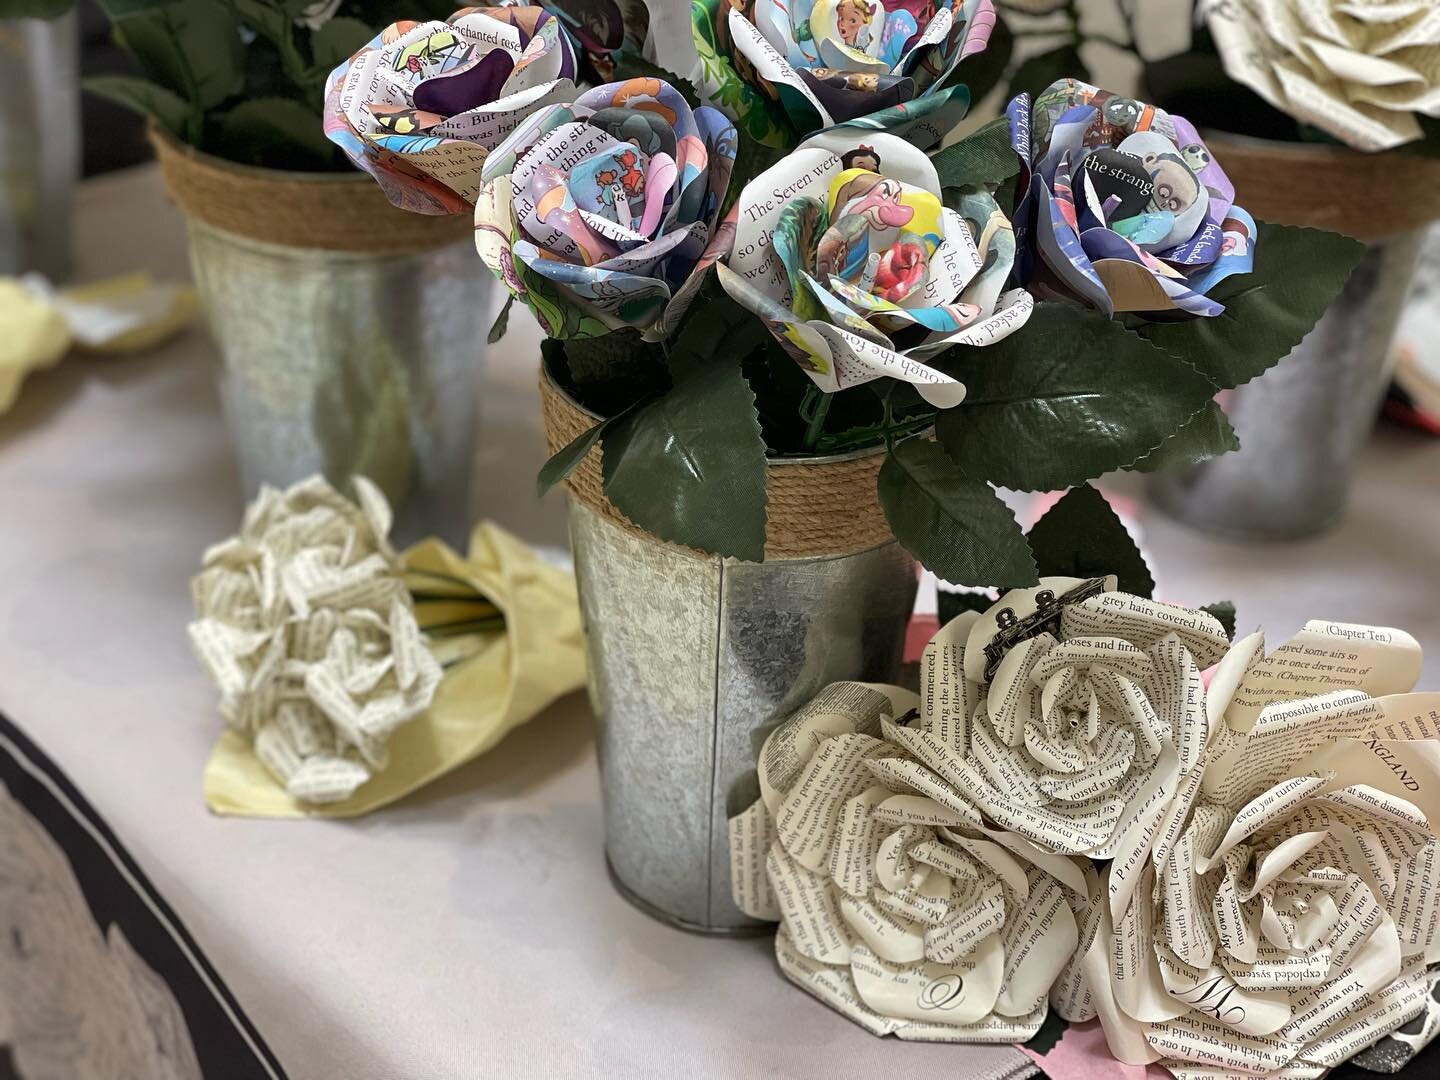 How incredible are these paper flowers? And just in time for spring! Who wants a bouquet from @literaryblooms 💐 😍